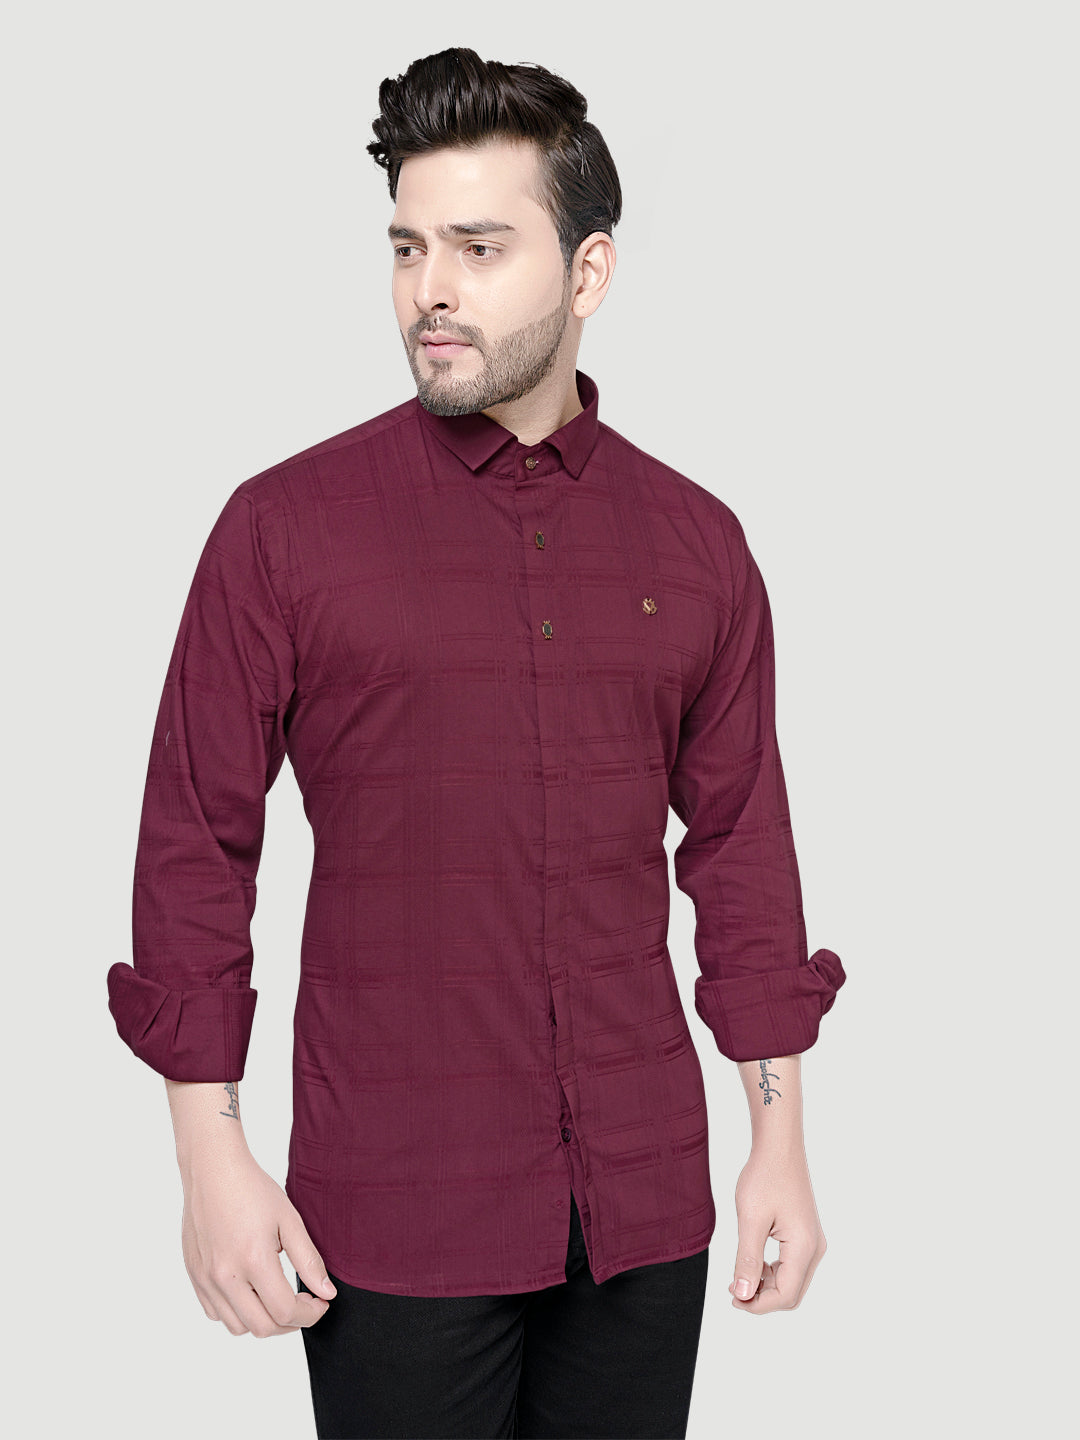 Black and White Shirts Designer Shirts with Collar Accessories- Maroon